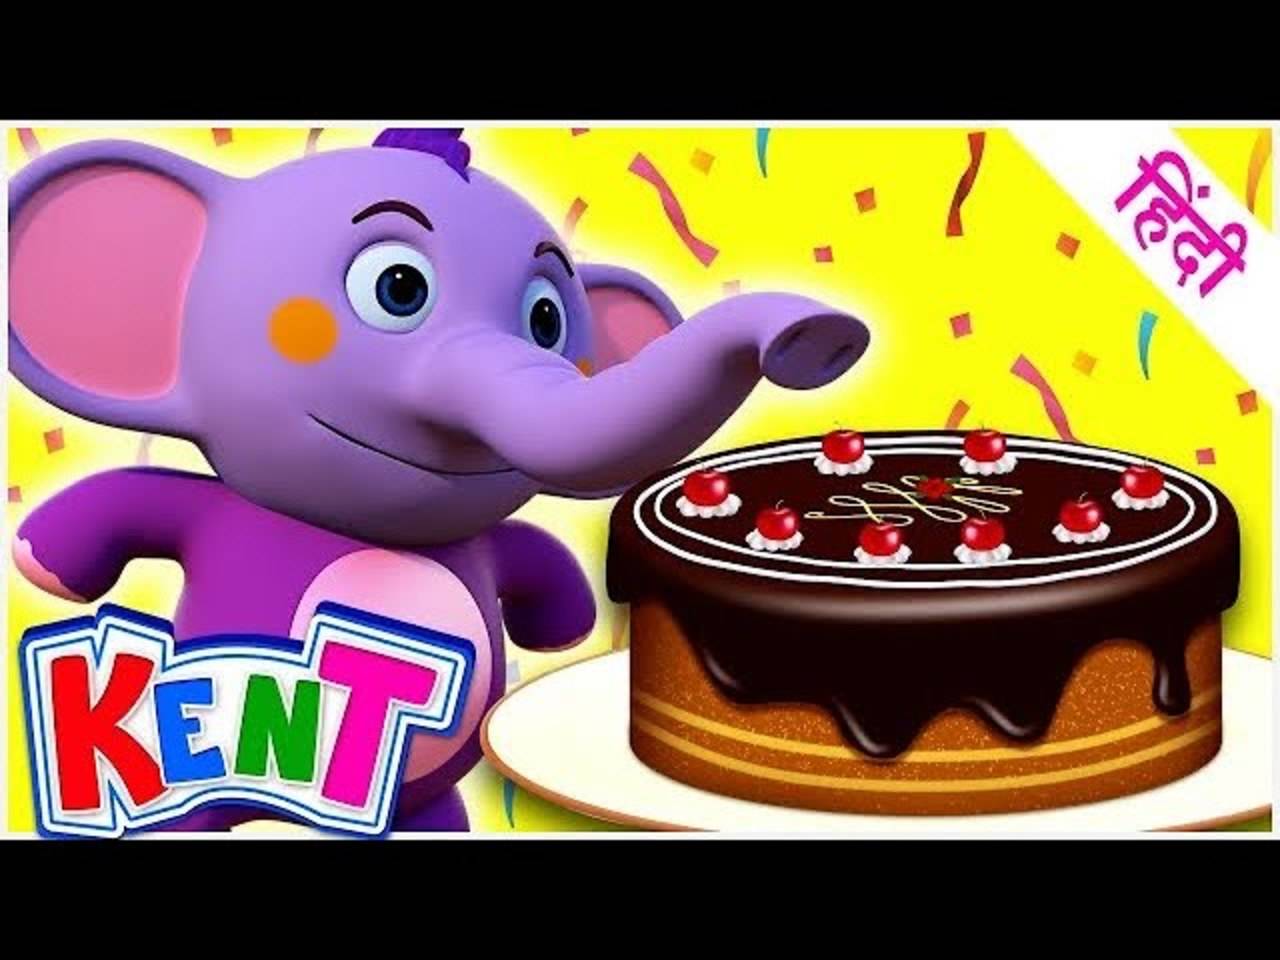 Latest Children Hindi Rhyme 'Kent Baking A Yummy Cake' For Kids - Check Out  Kids Nursery Rhymes And Baby Songs In Hindi | Entertainment - Times of  India Videos